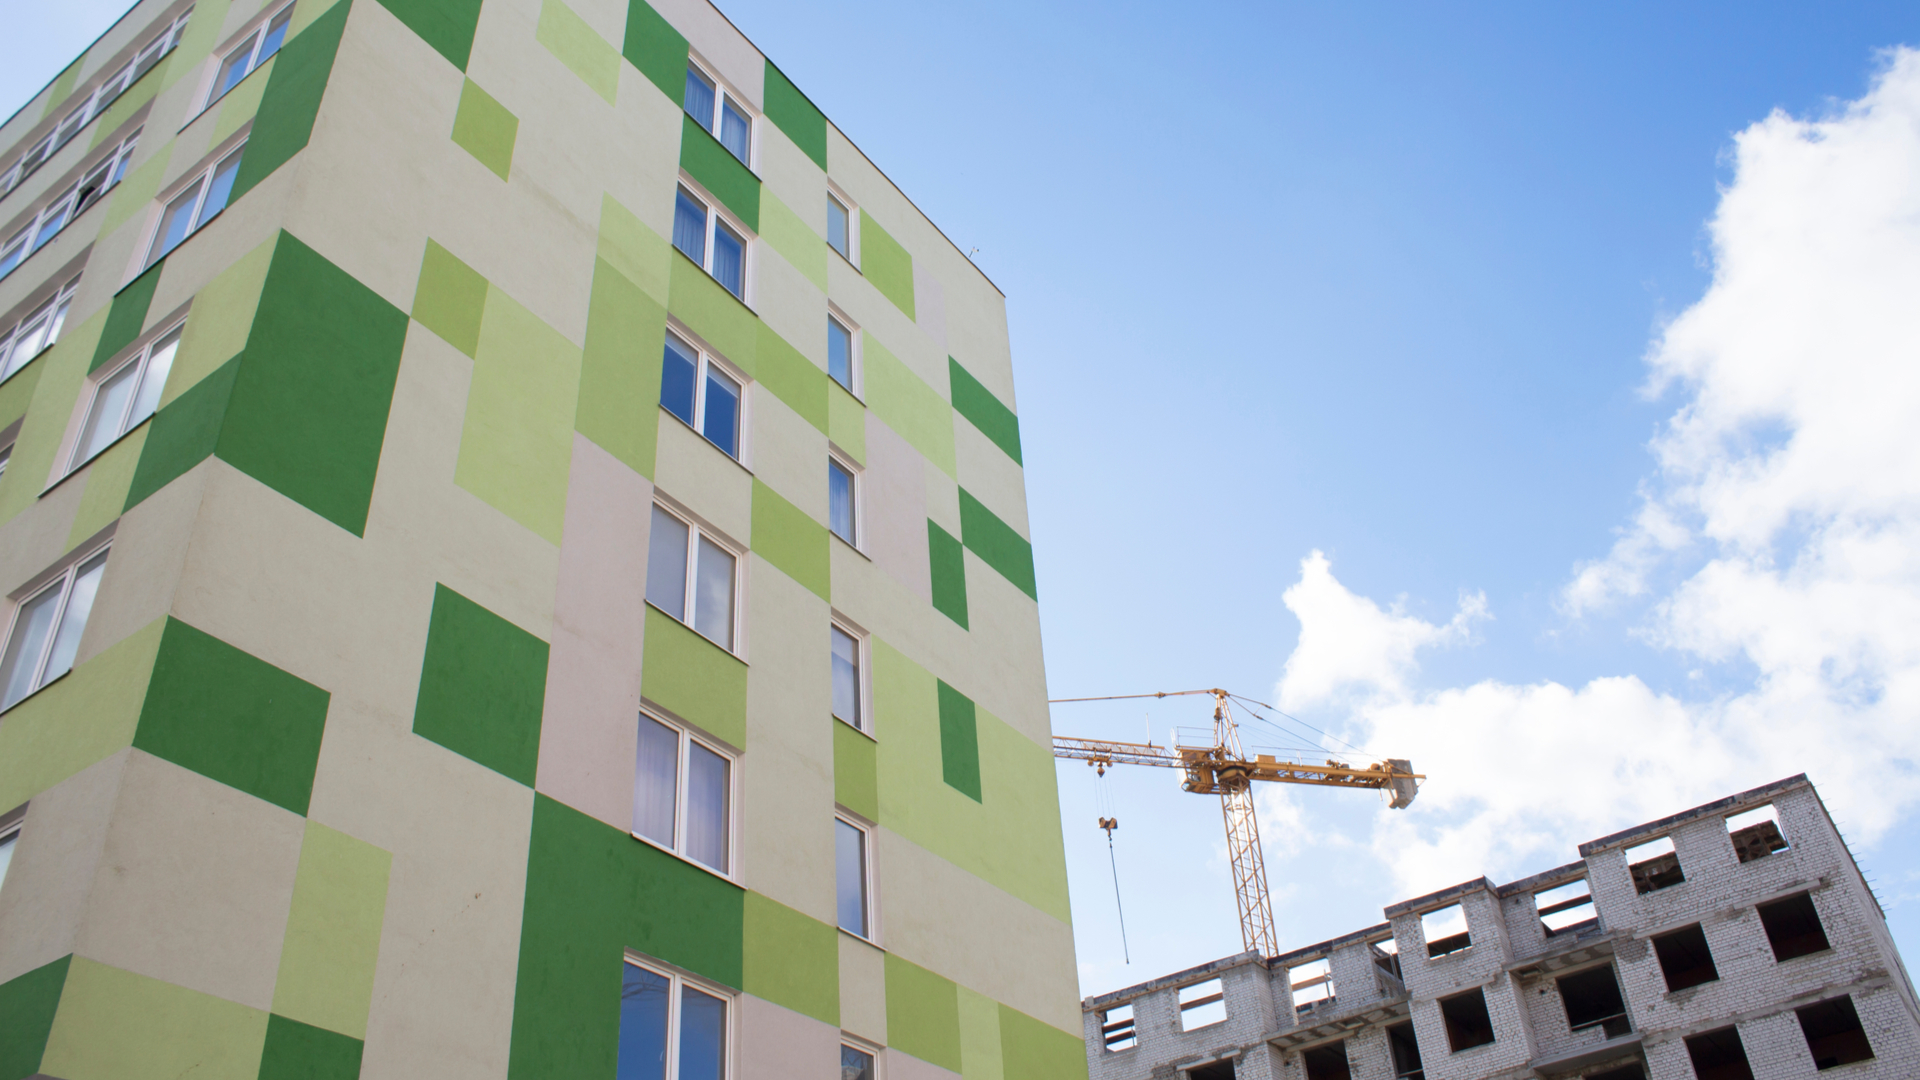 Fire safety guidance strengthened for new high-rise dwellings